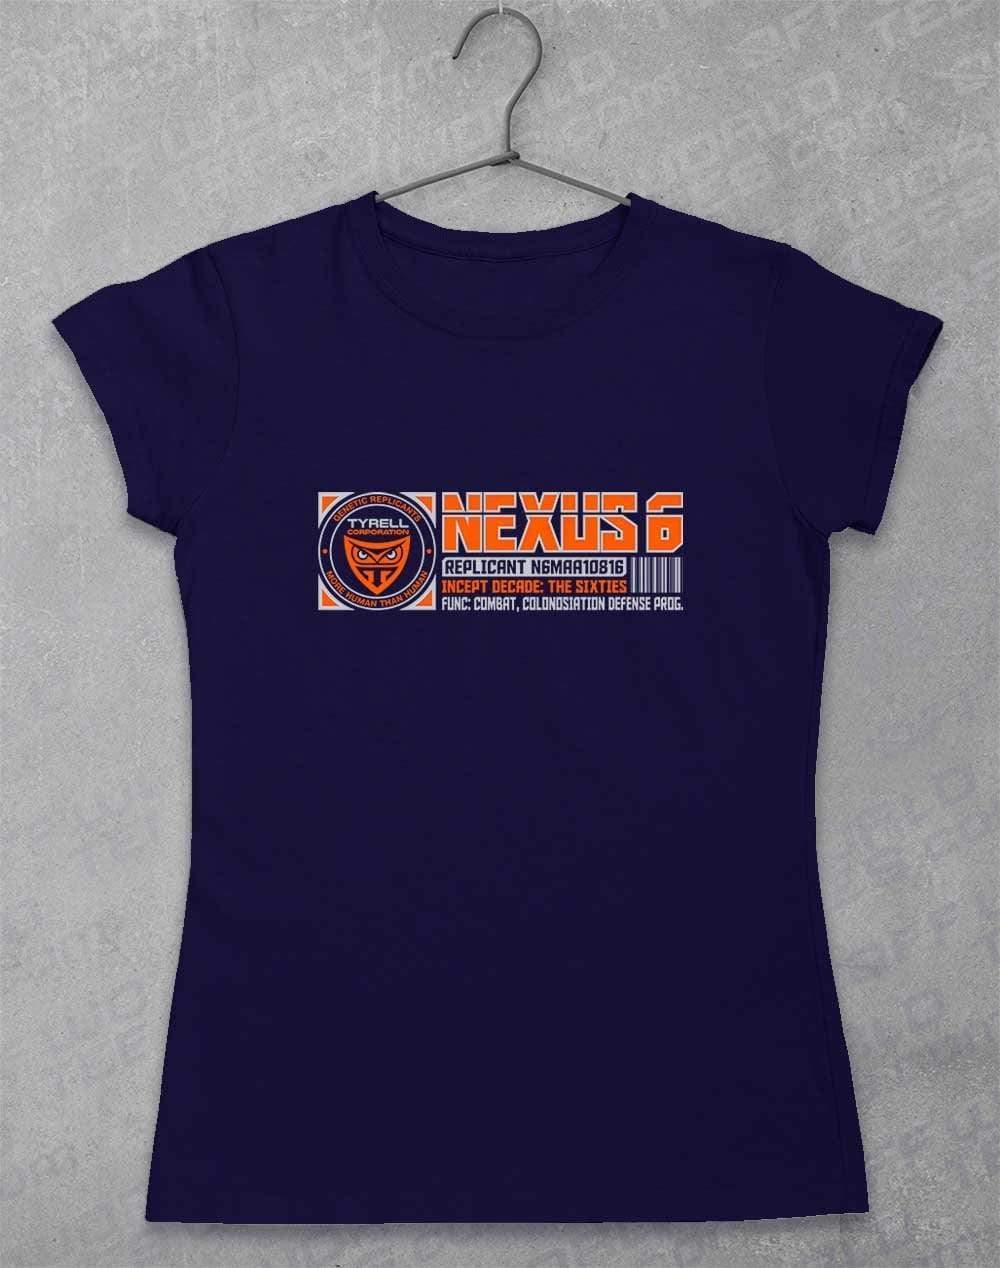 Nexus 6 Replicant Incept Date (CHOOSE YOUR DECADE!) Women's T-Shirt The Sixties - Navy / 8-10  - Off World Tees